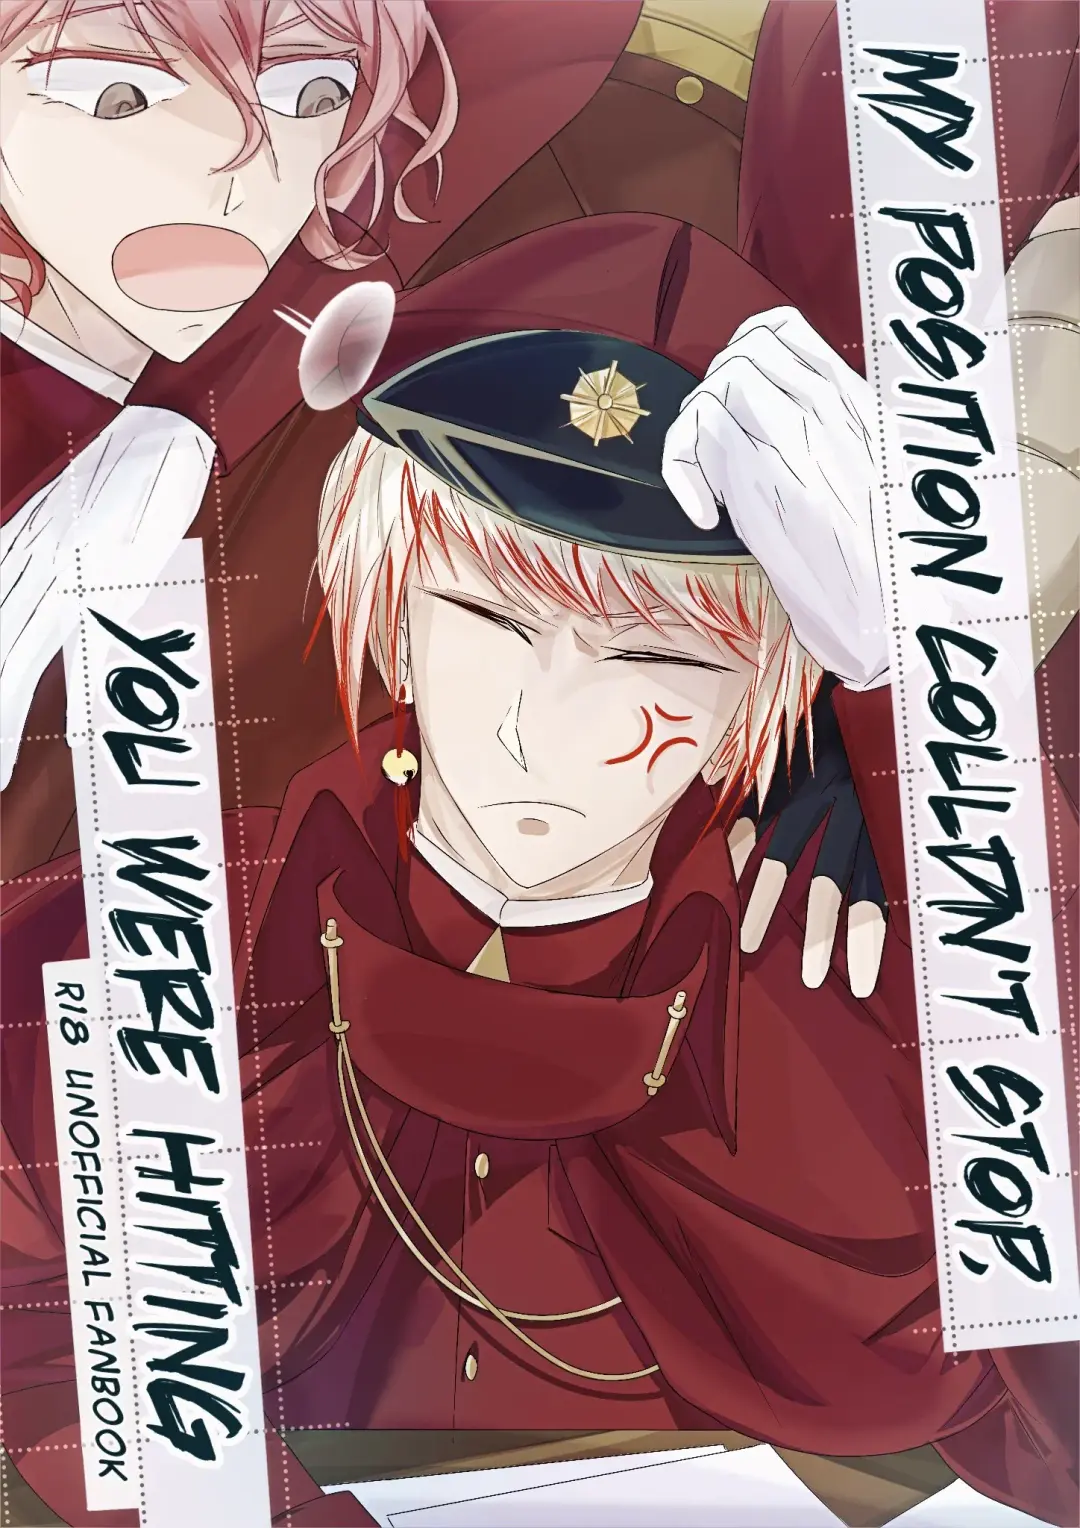 Read My Position Couldn't Stop, You Were Hitting - Bungo Stray Dogs - English - Fhentai.net